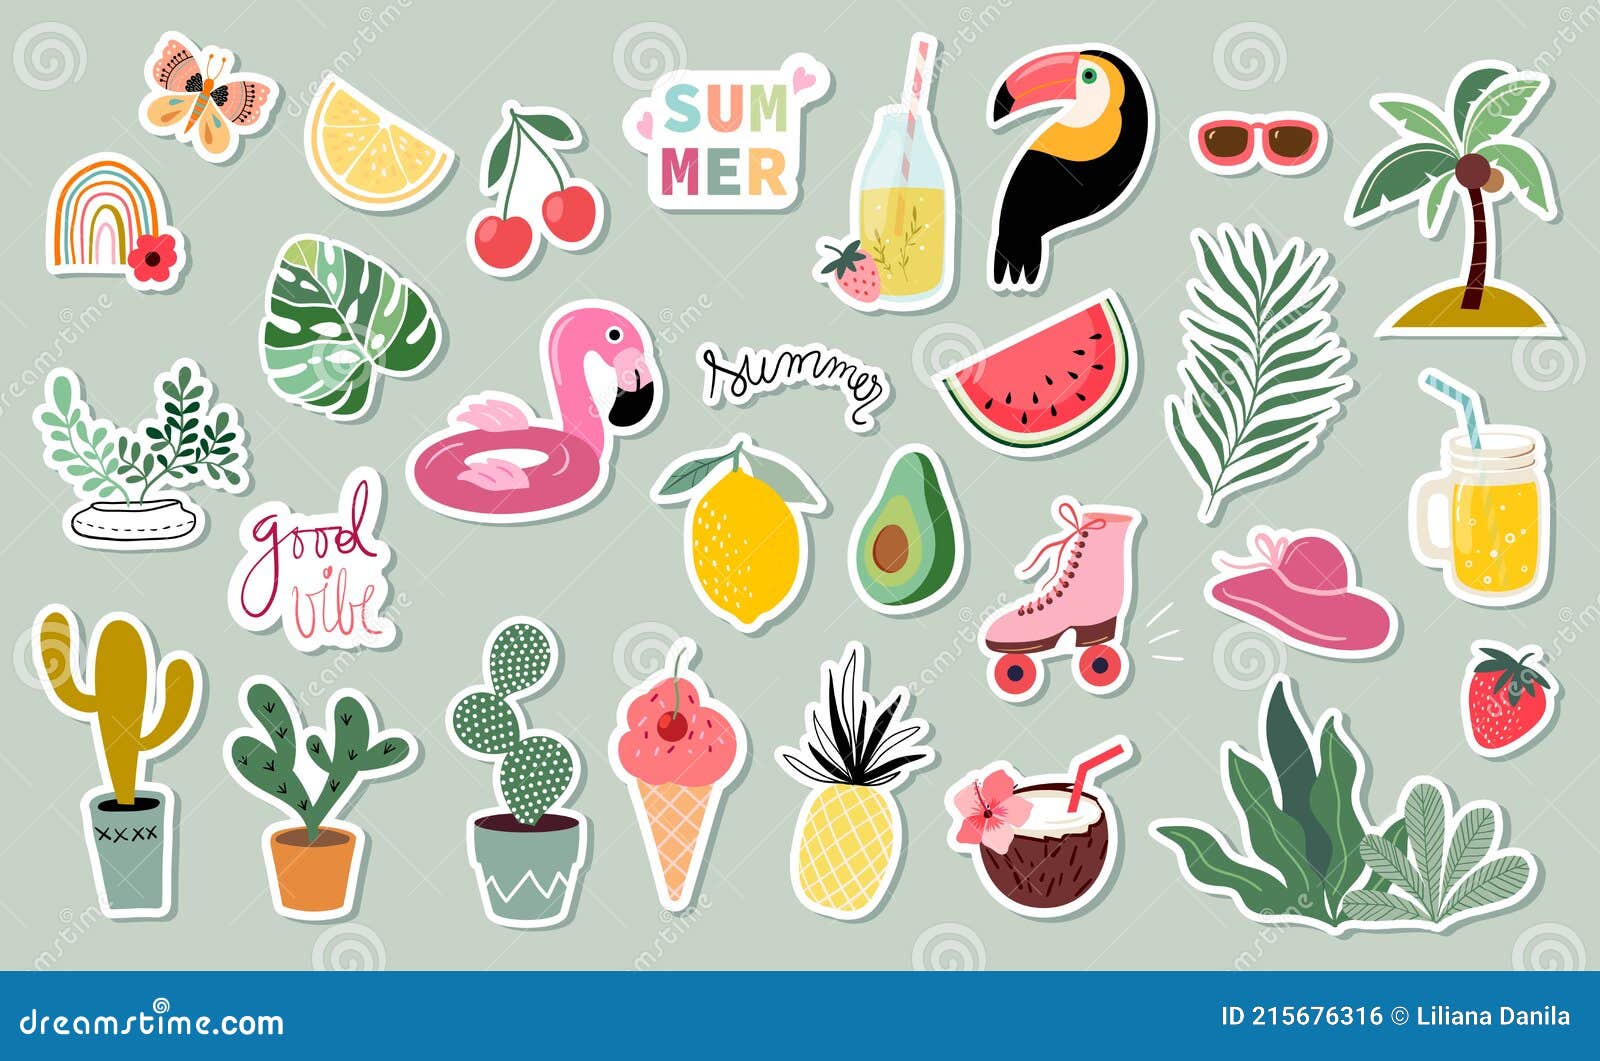 summer stickers collection with different seasonal s